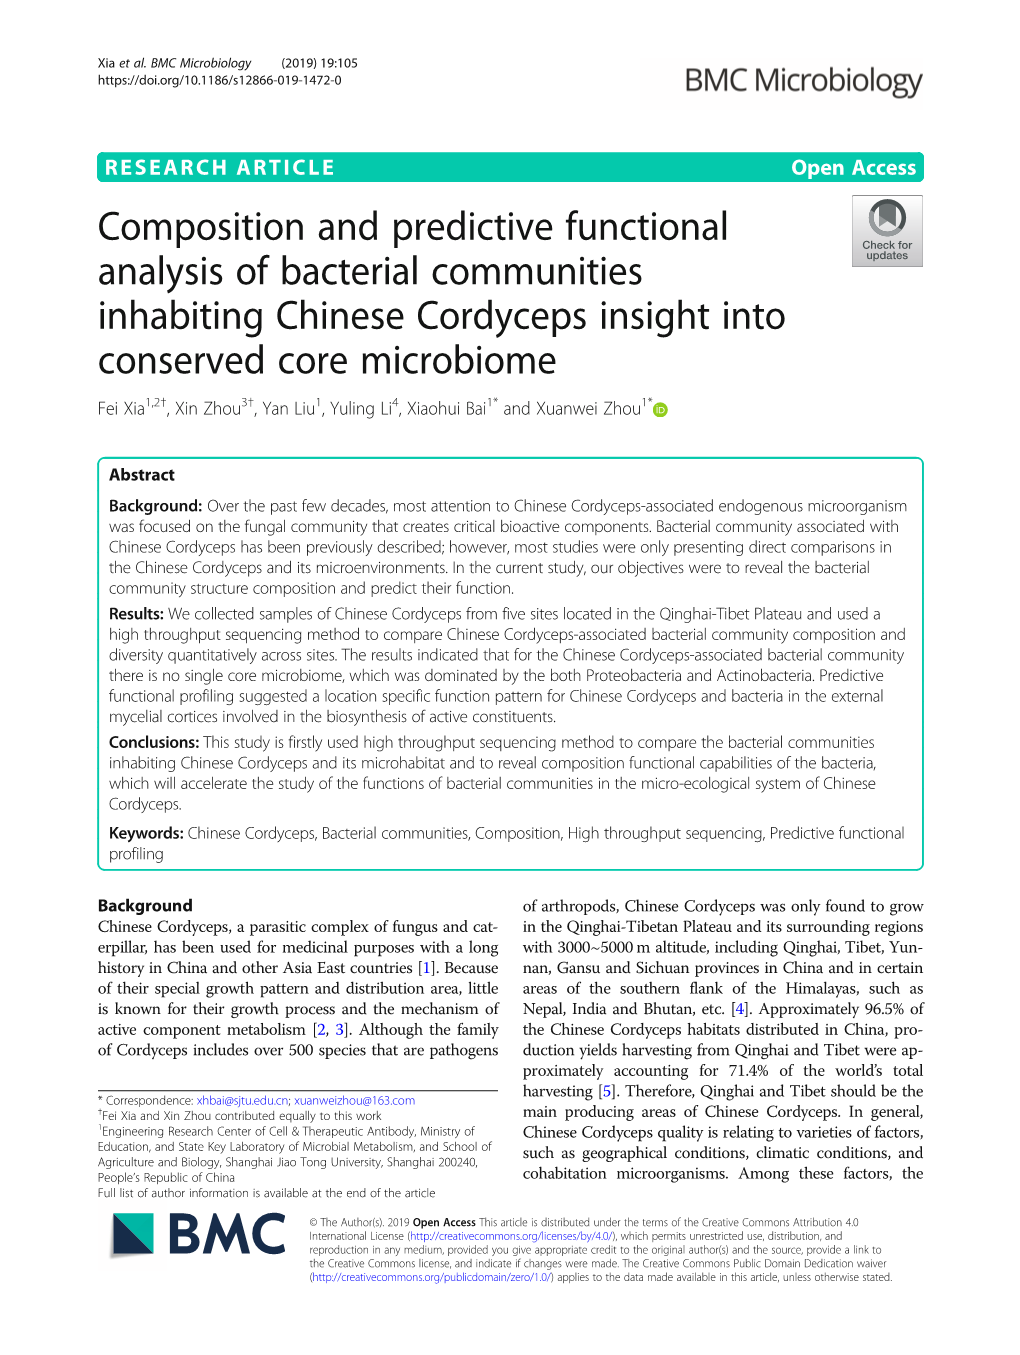 Composition and Predictive Functional Analysis of Bacterial Communities